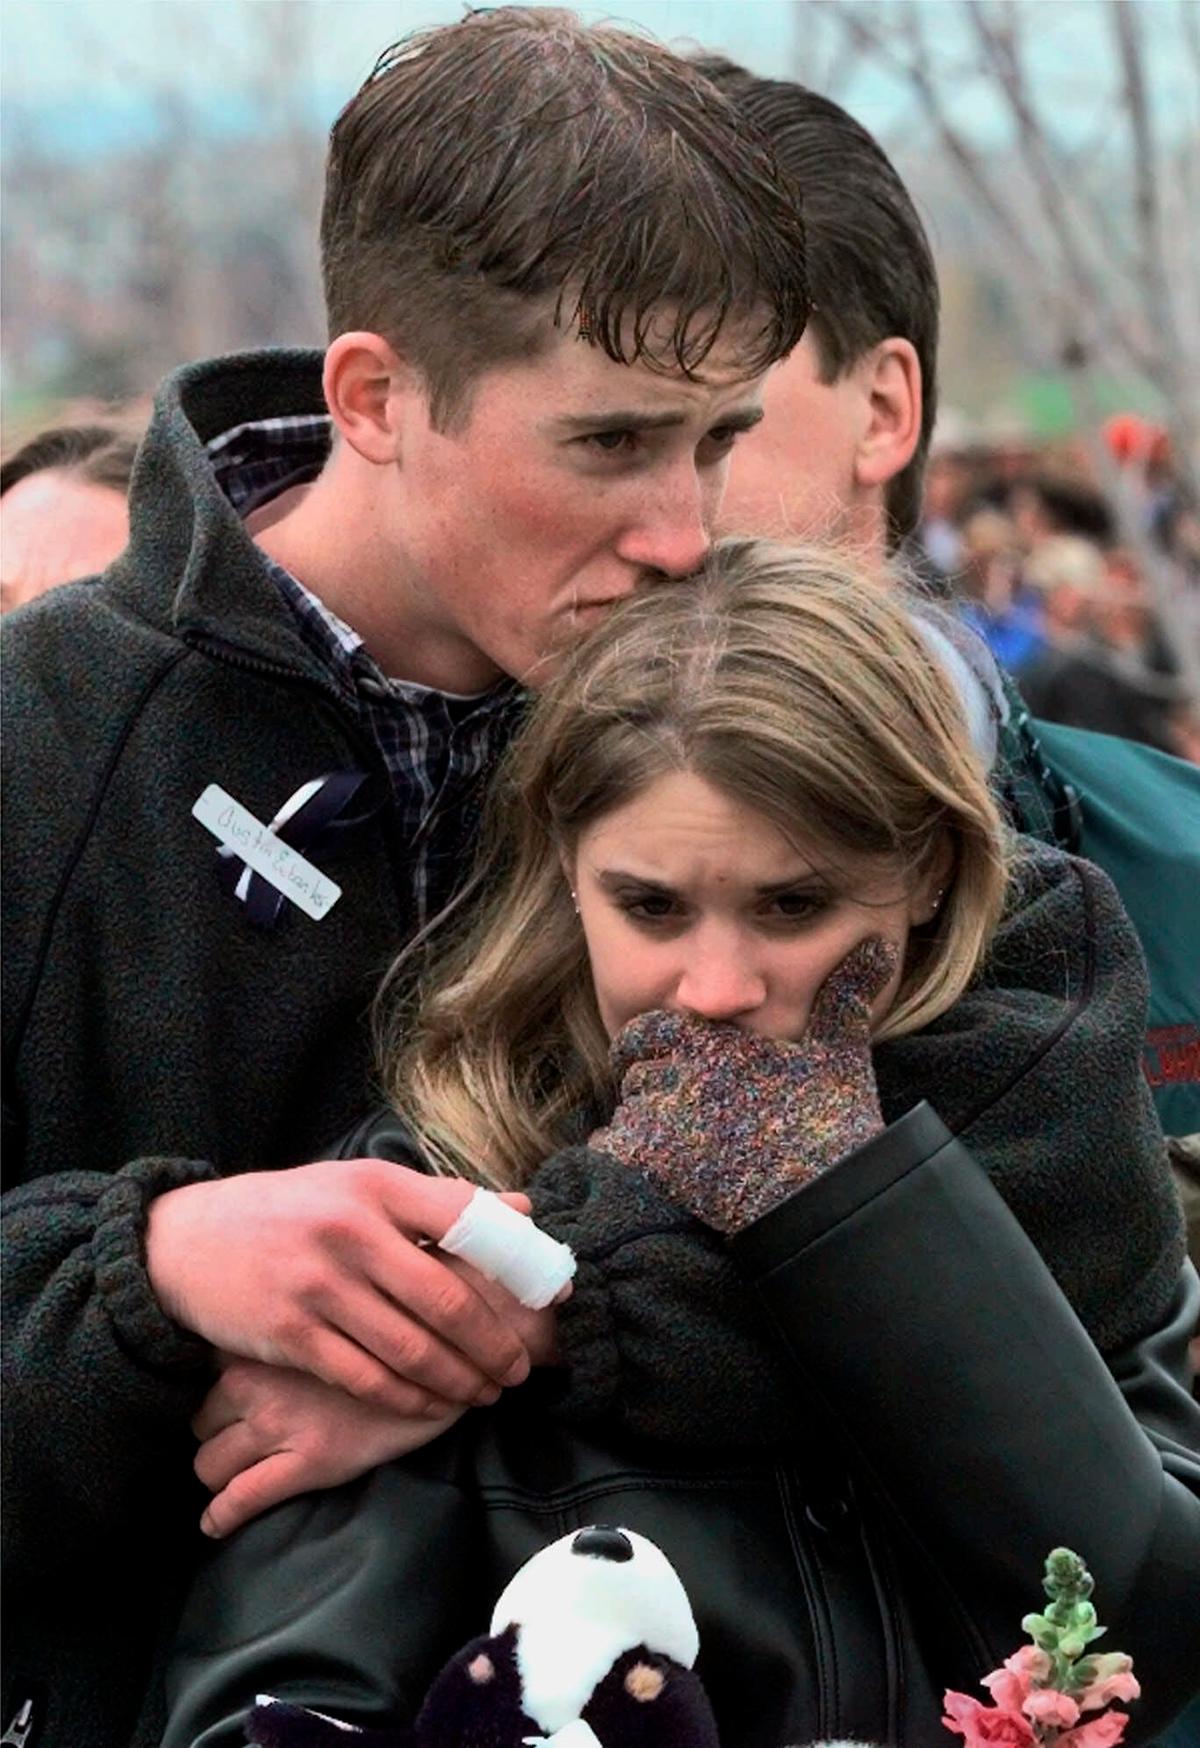 Austin Eubanks hugs his girlfriend during a community-wide memorial service in Littleton, Colo., for the victims of the shooting rampage at Columbine High School on April 25, 1999. (Bebeto Matthews/AP Photo)